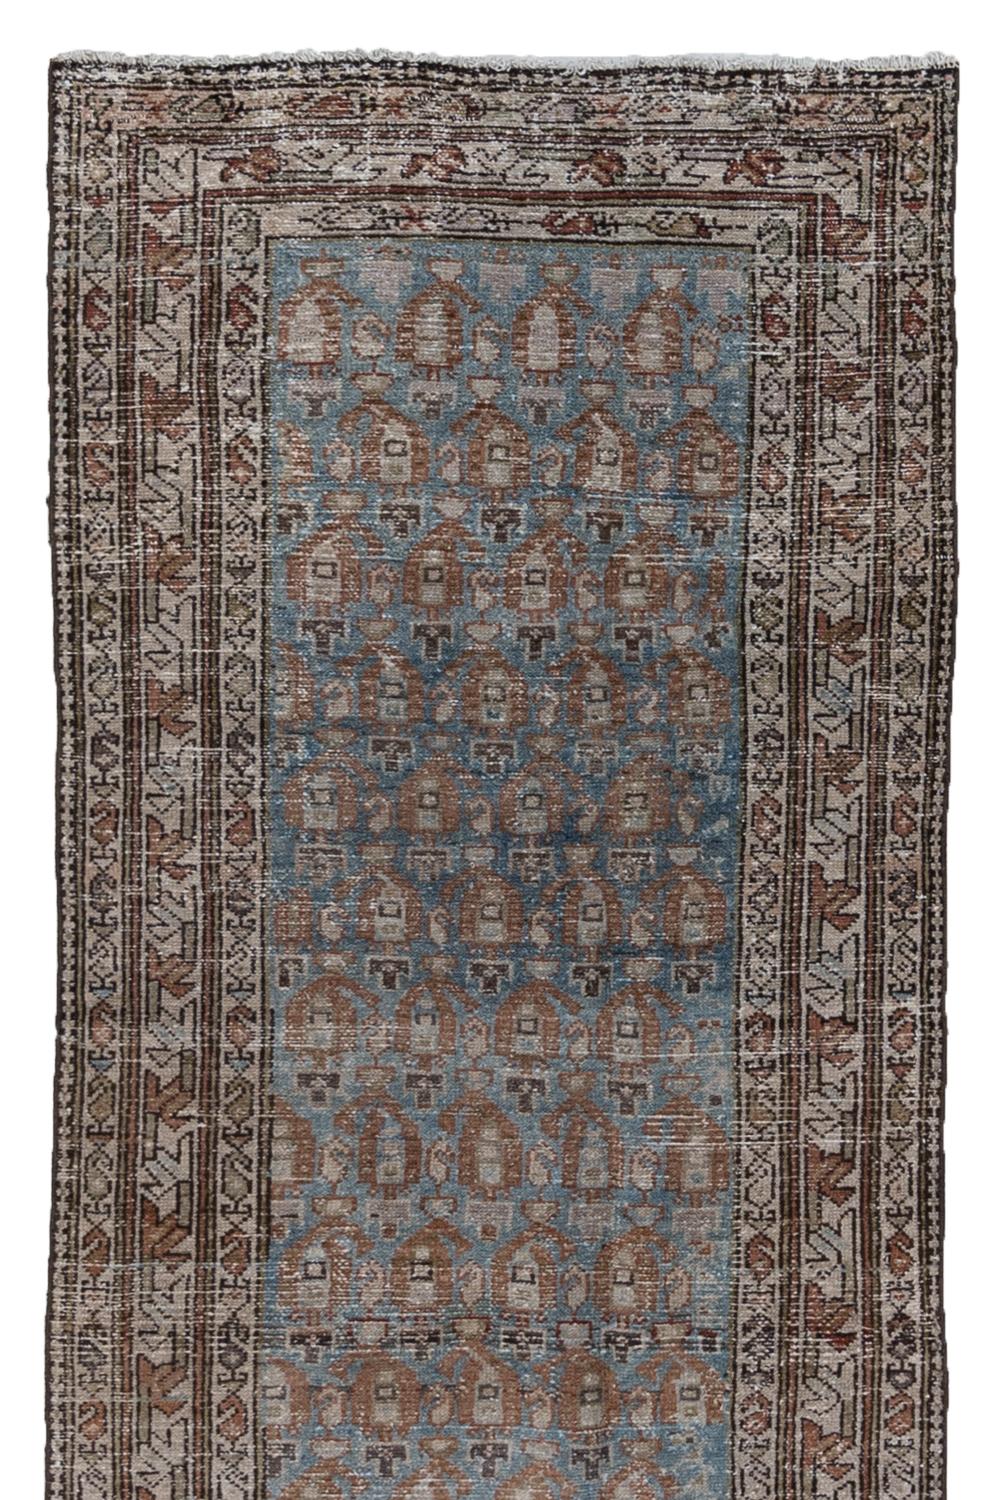 Early 20th Century Vintage Persian Malayer Runner Rug